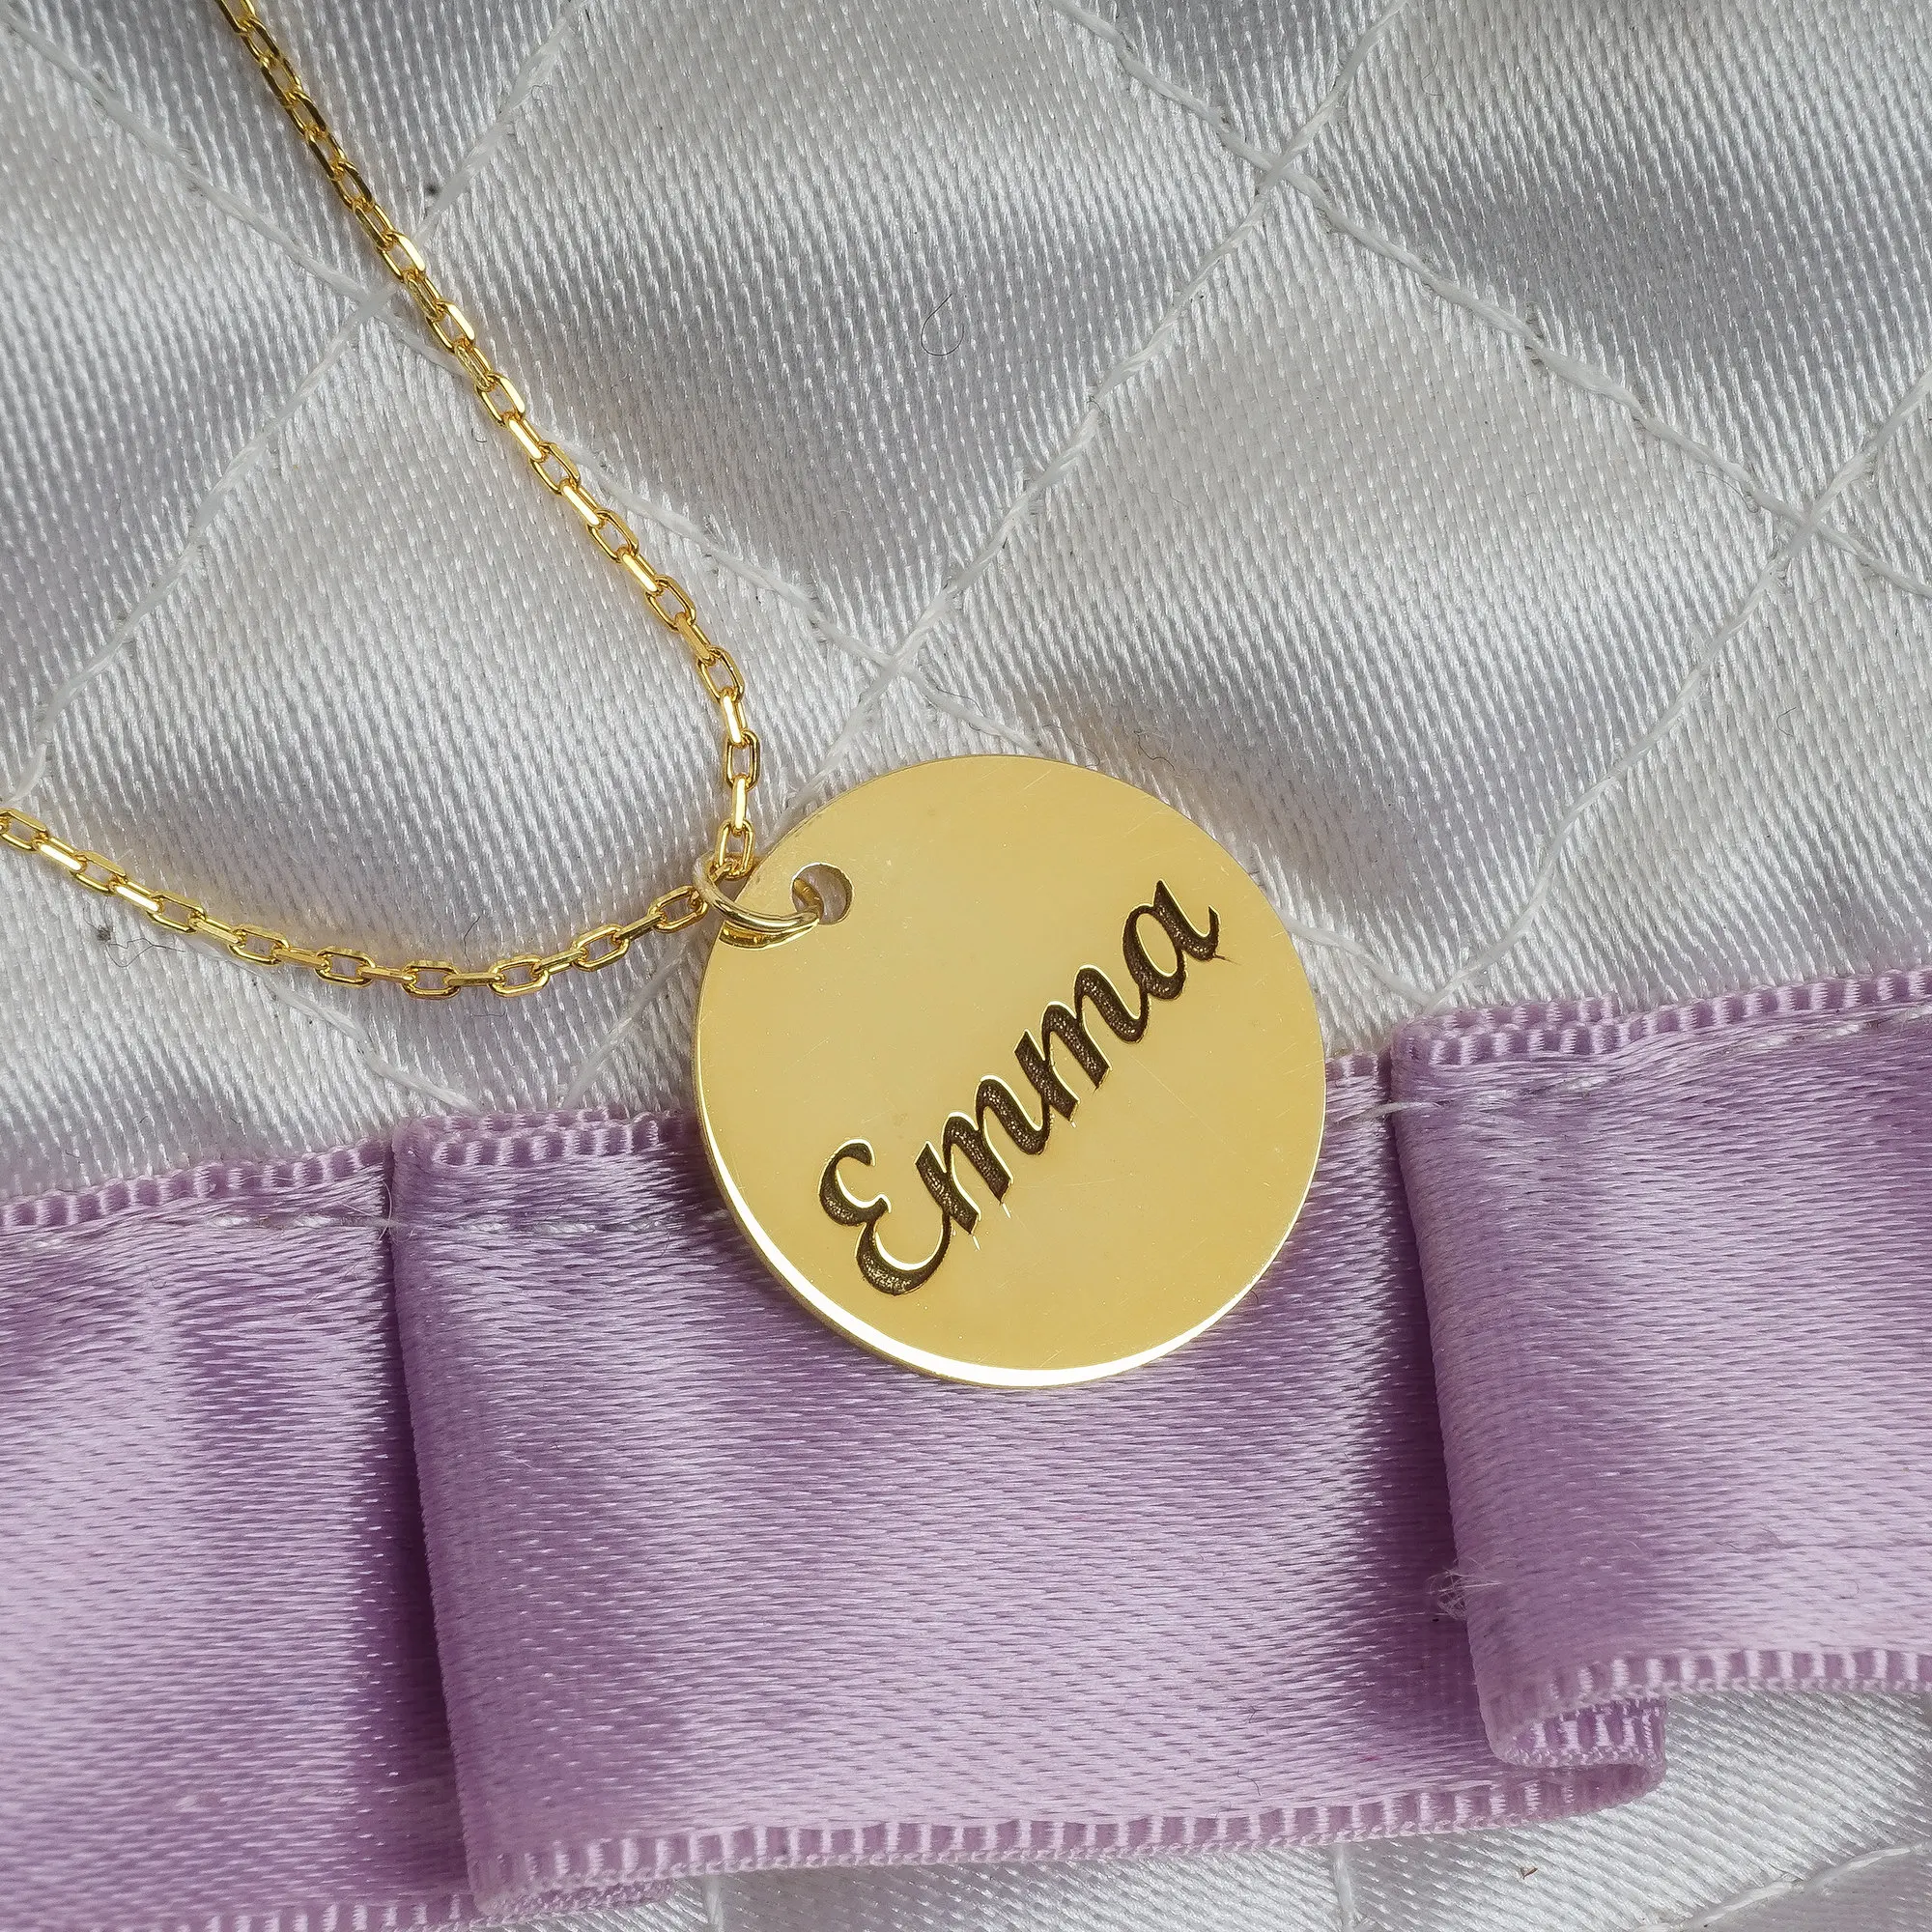 Personalized Jewelry, Name Necklace,Stainless Steel Personalized Name,Custom Name Necklace, Custom Necklace, Personalized Gift